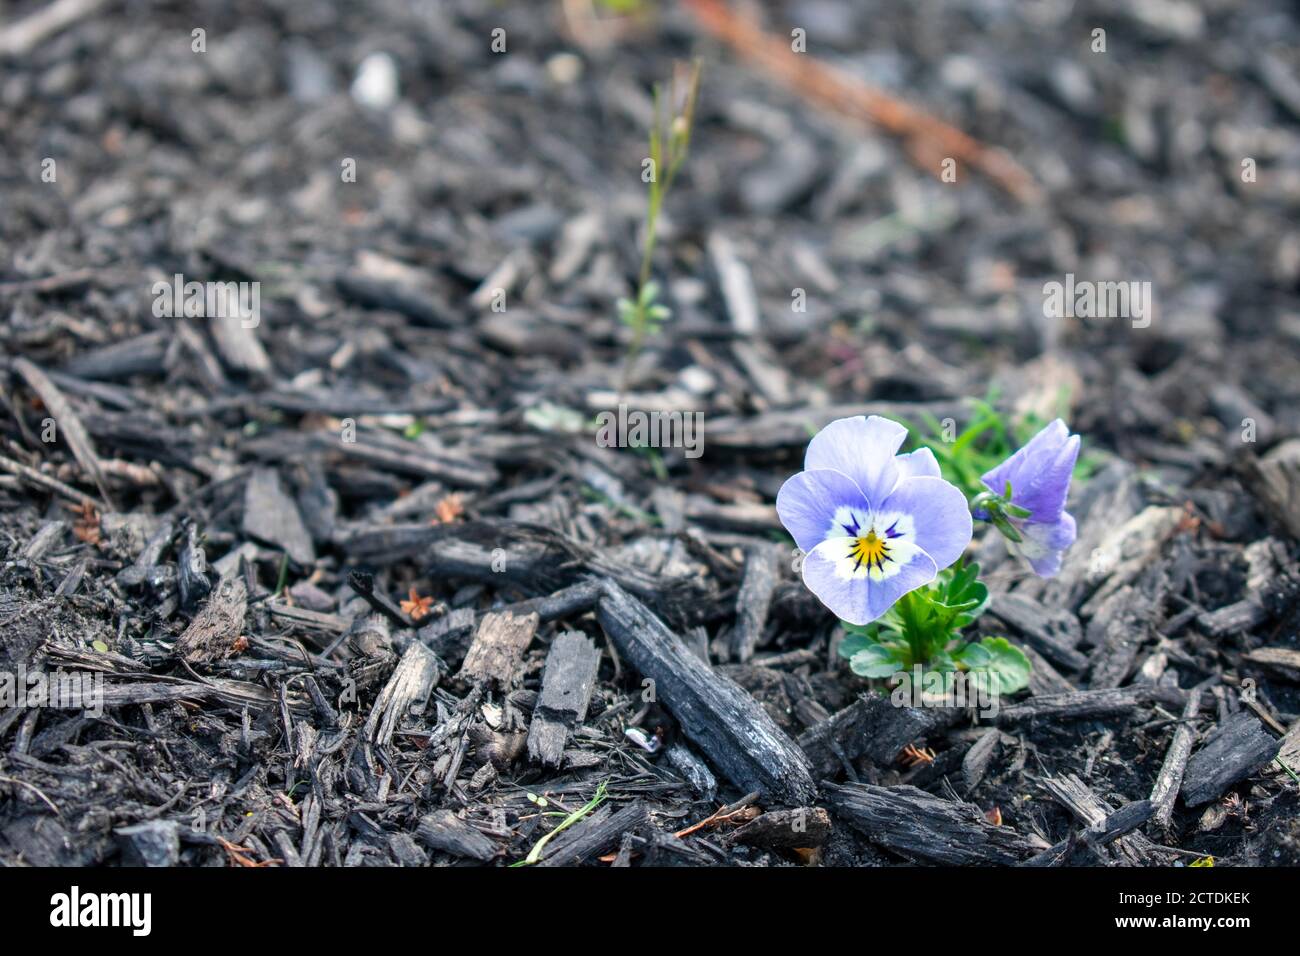 A Close Up Shot of Small Light Blue Flowers Sitting in a Bed of Black Mulch Stock Photo